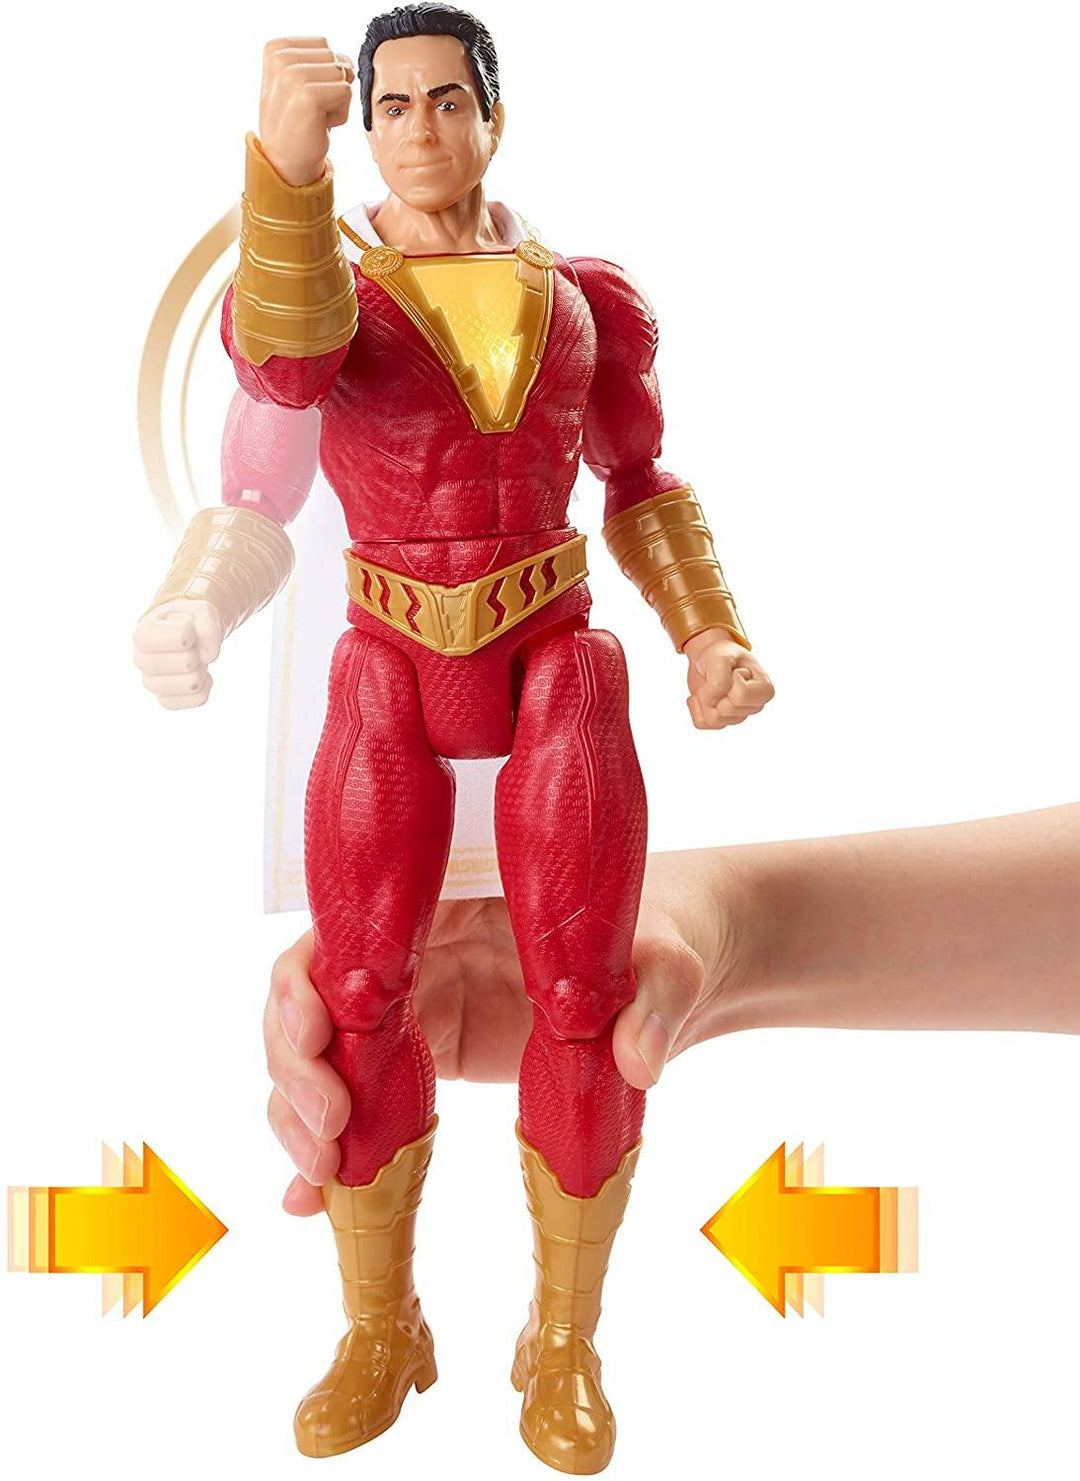 Fisher Price GGY38 DC Comics Thunder Punch Shazam Movie Action Figure with Lights and Sounds - Yachew